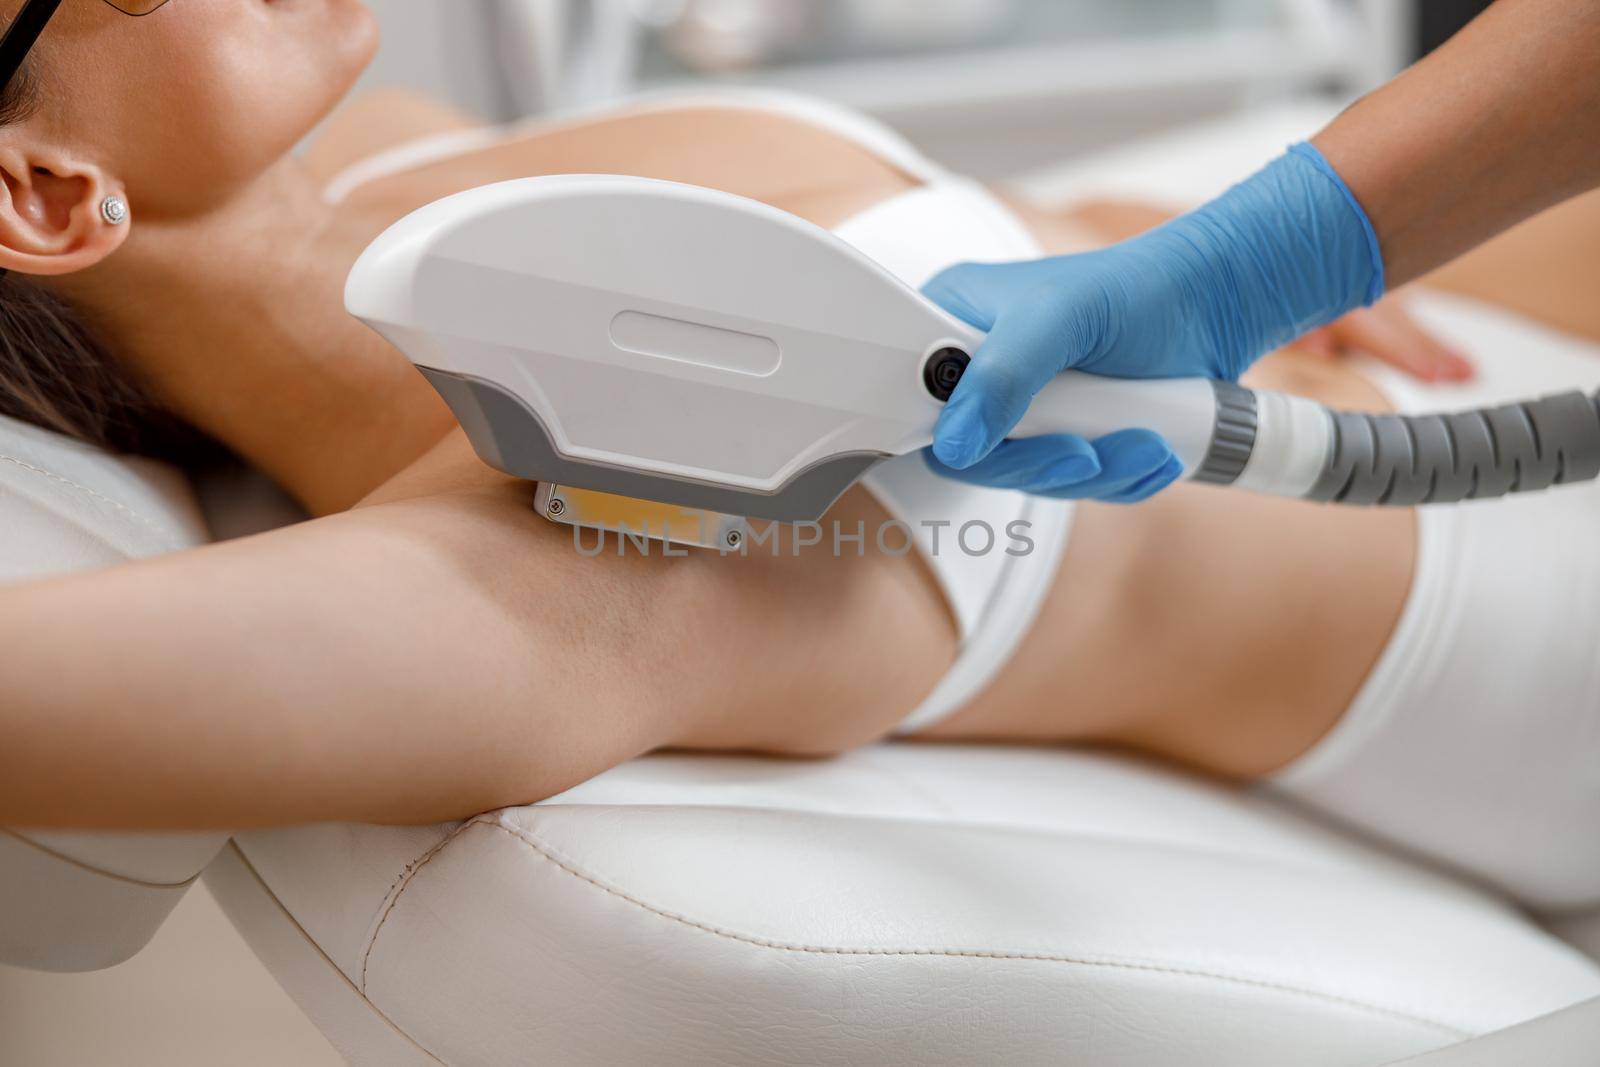 Closeup of armpit hair laser removal procedure with ipl machine in a beauty salon by Yaroslav_astakhov